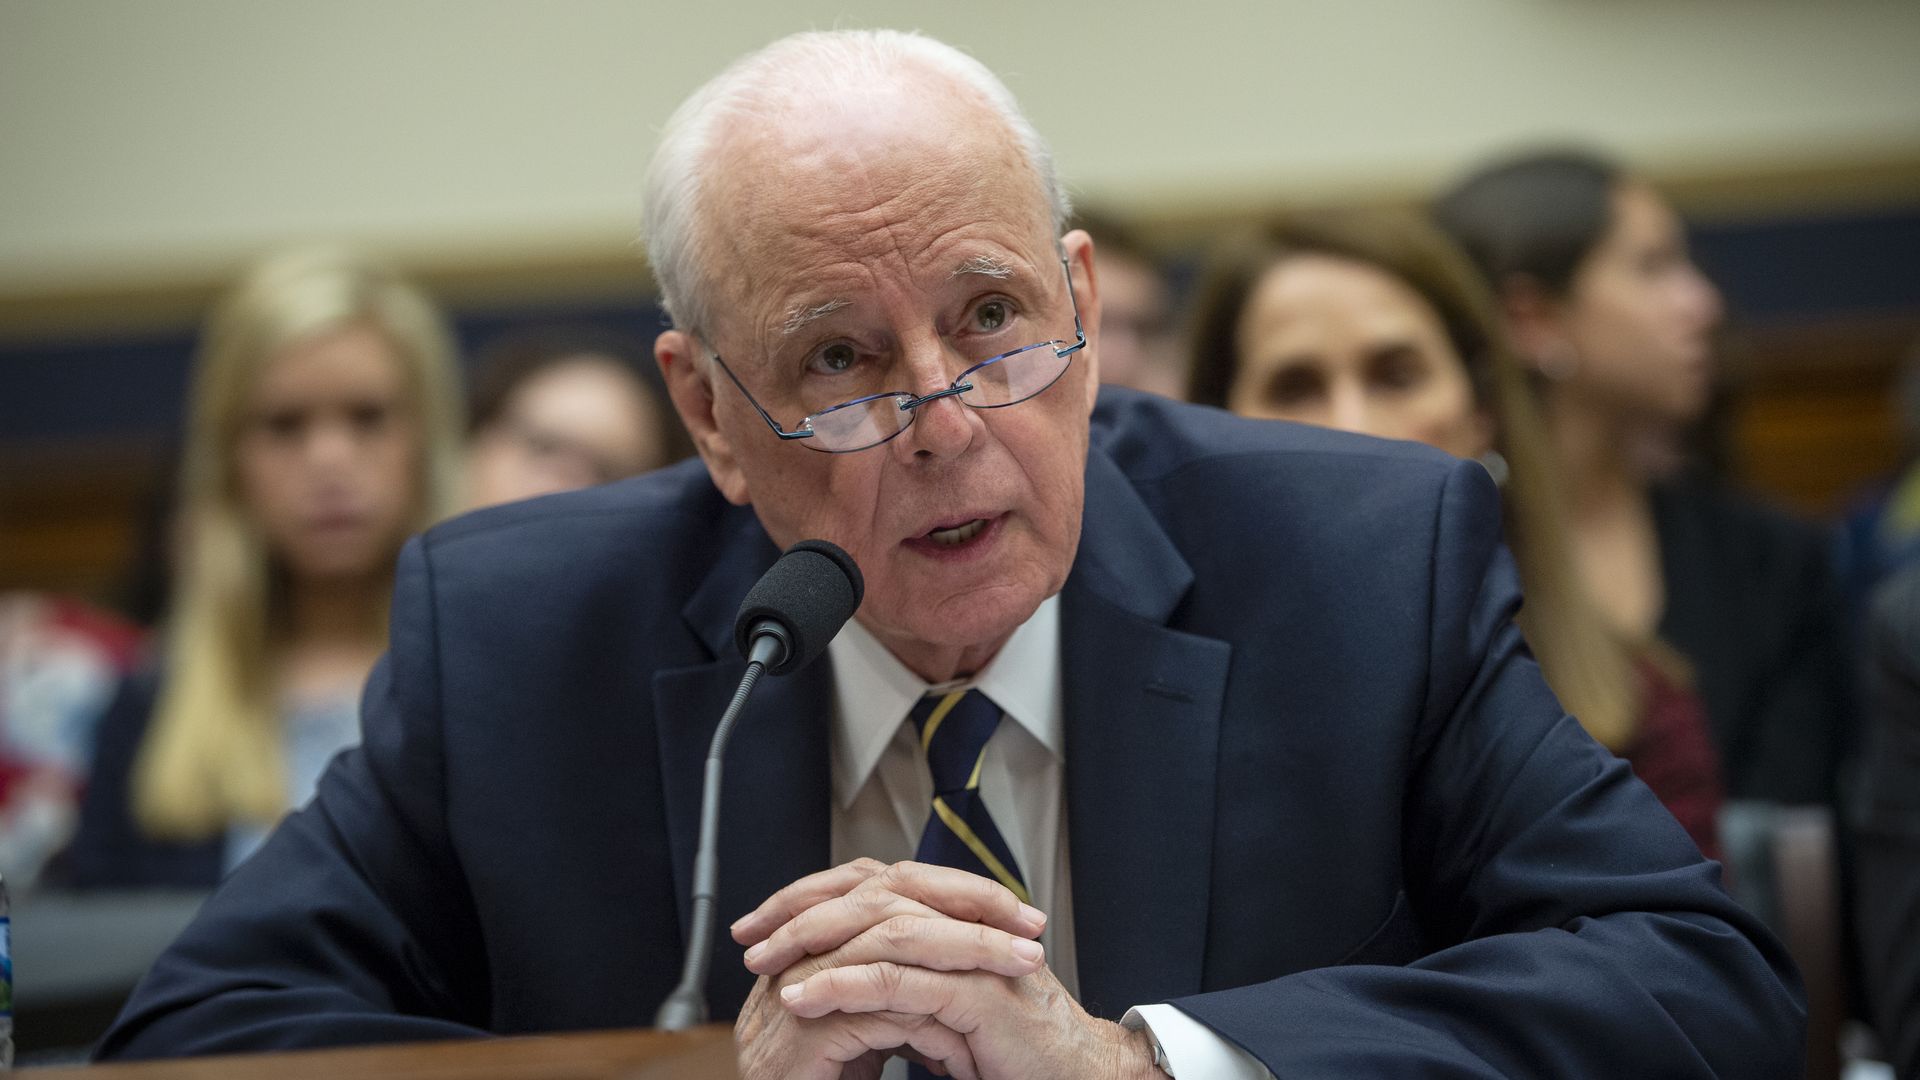 Former White House Counsel John Dean testifies during a House Judiciary Committee hearing about Lessons from the Mueller Report.